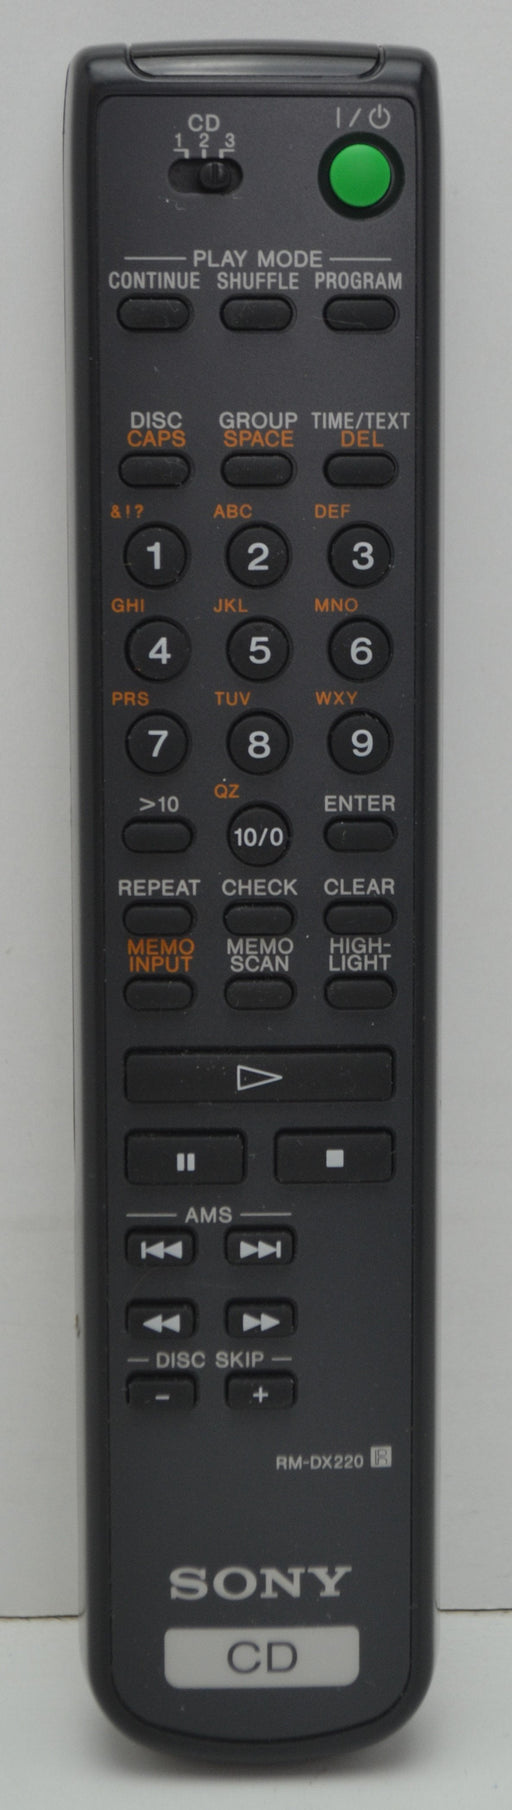 Sony RM-DX220 CD Compact Disc Player Remote Control-Remote-SpenCertified-refurbished-vintage-electonics